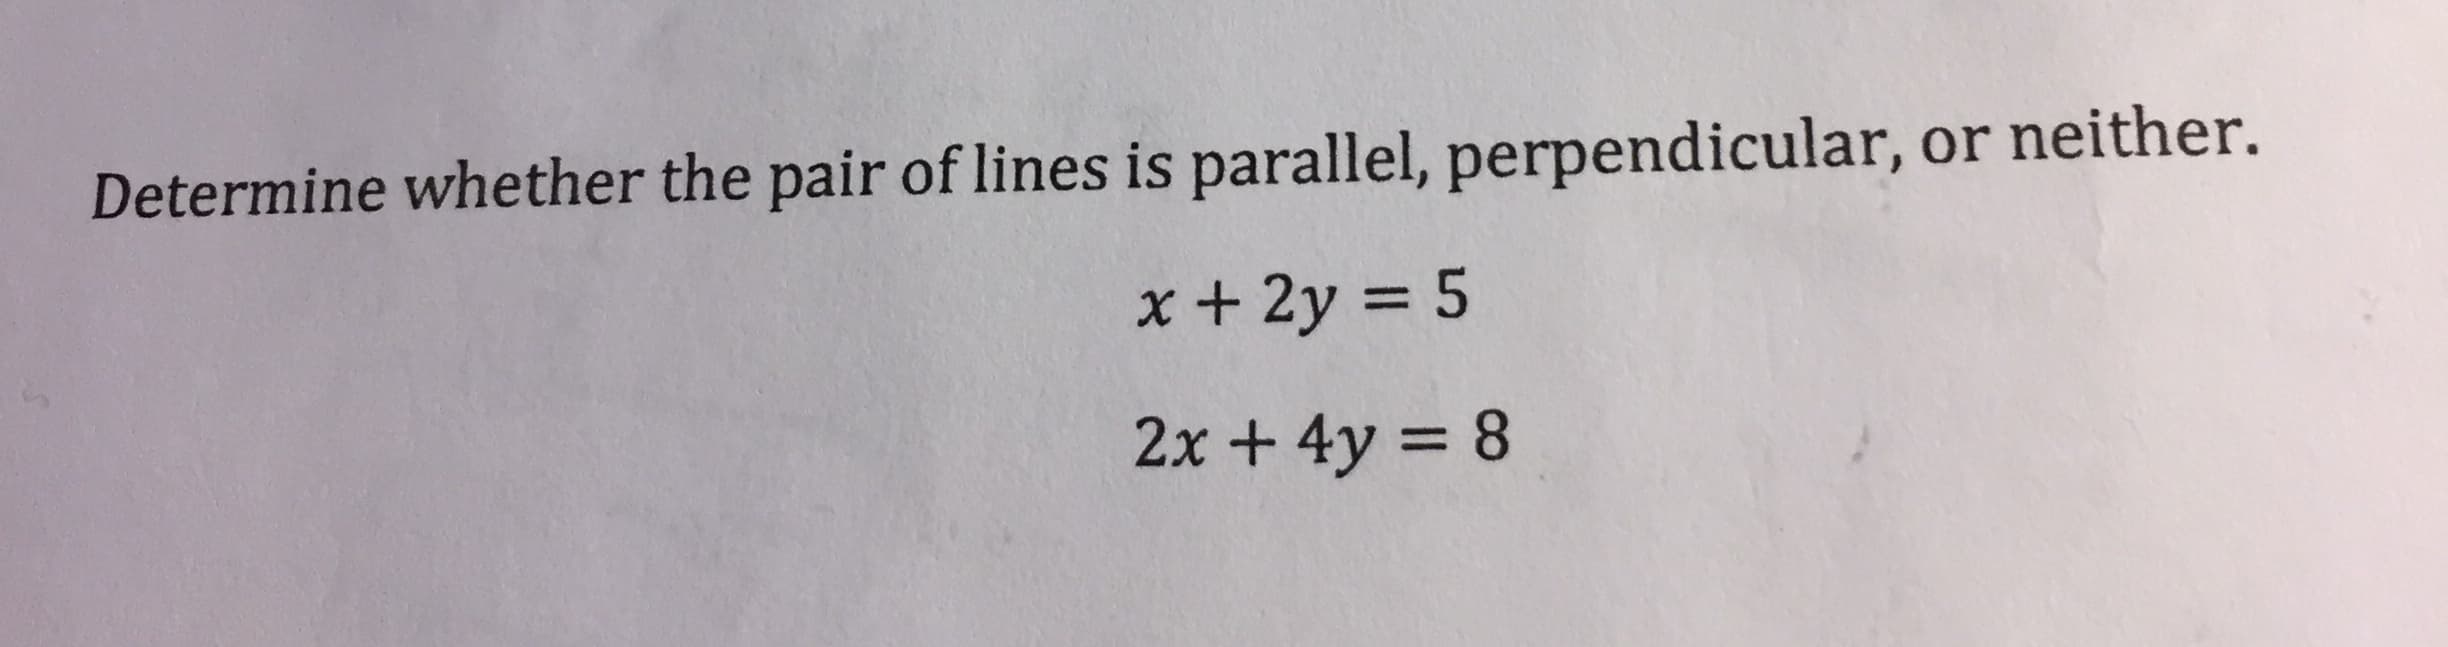 Determine whether the pair of lines is parallel, perpendicular, or neither.
x + 2y = 5
2x + 4y = 8
